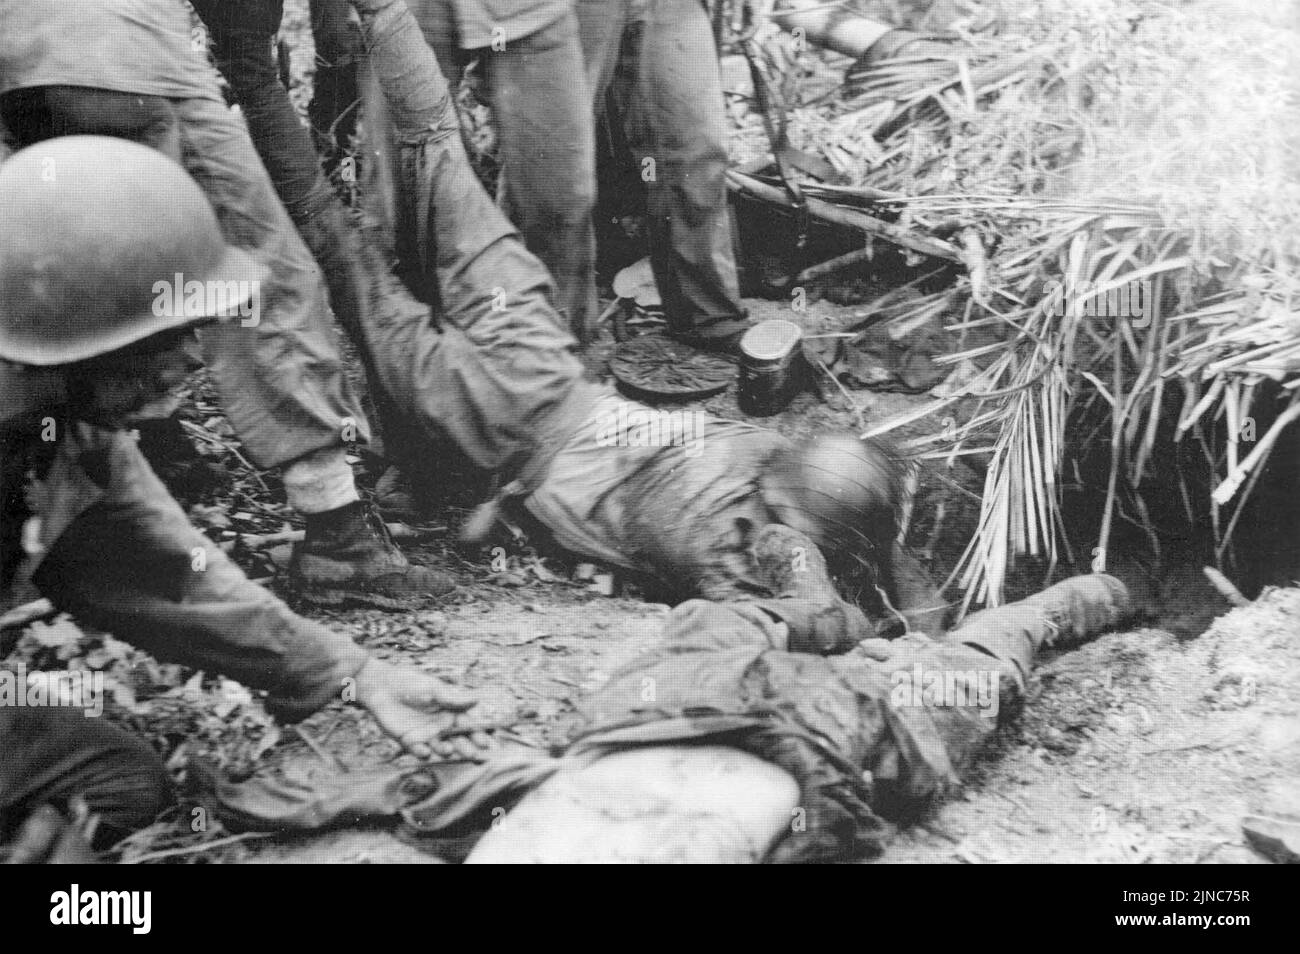 U.S. Marines drag the corpses of Japanese soldiers from their bunker in the Point Cruz area after the battle in early November during the Matinakau Offensive, which was a battle in the Guadalcanal Campaign. Stock Photo